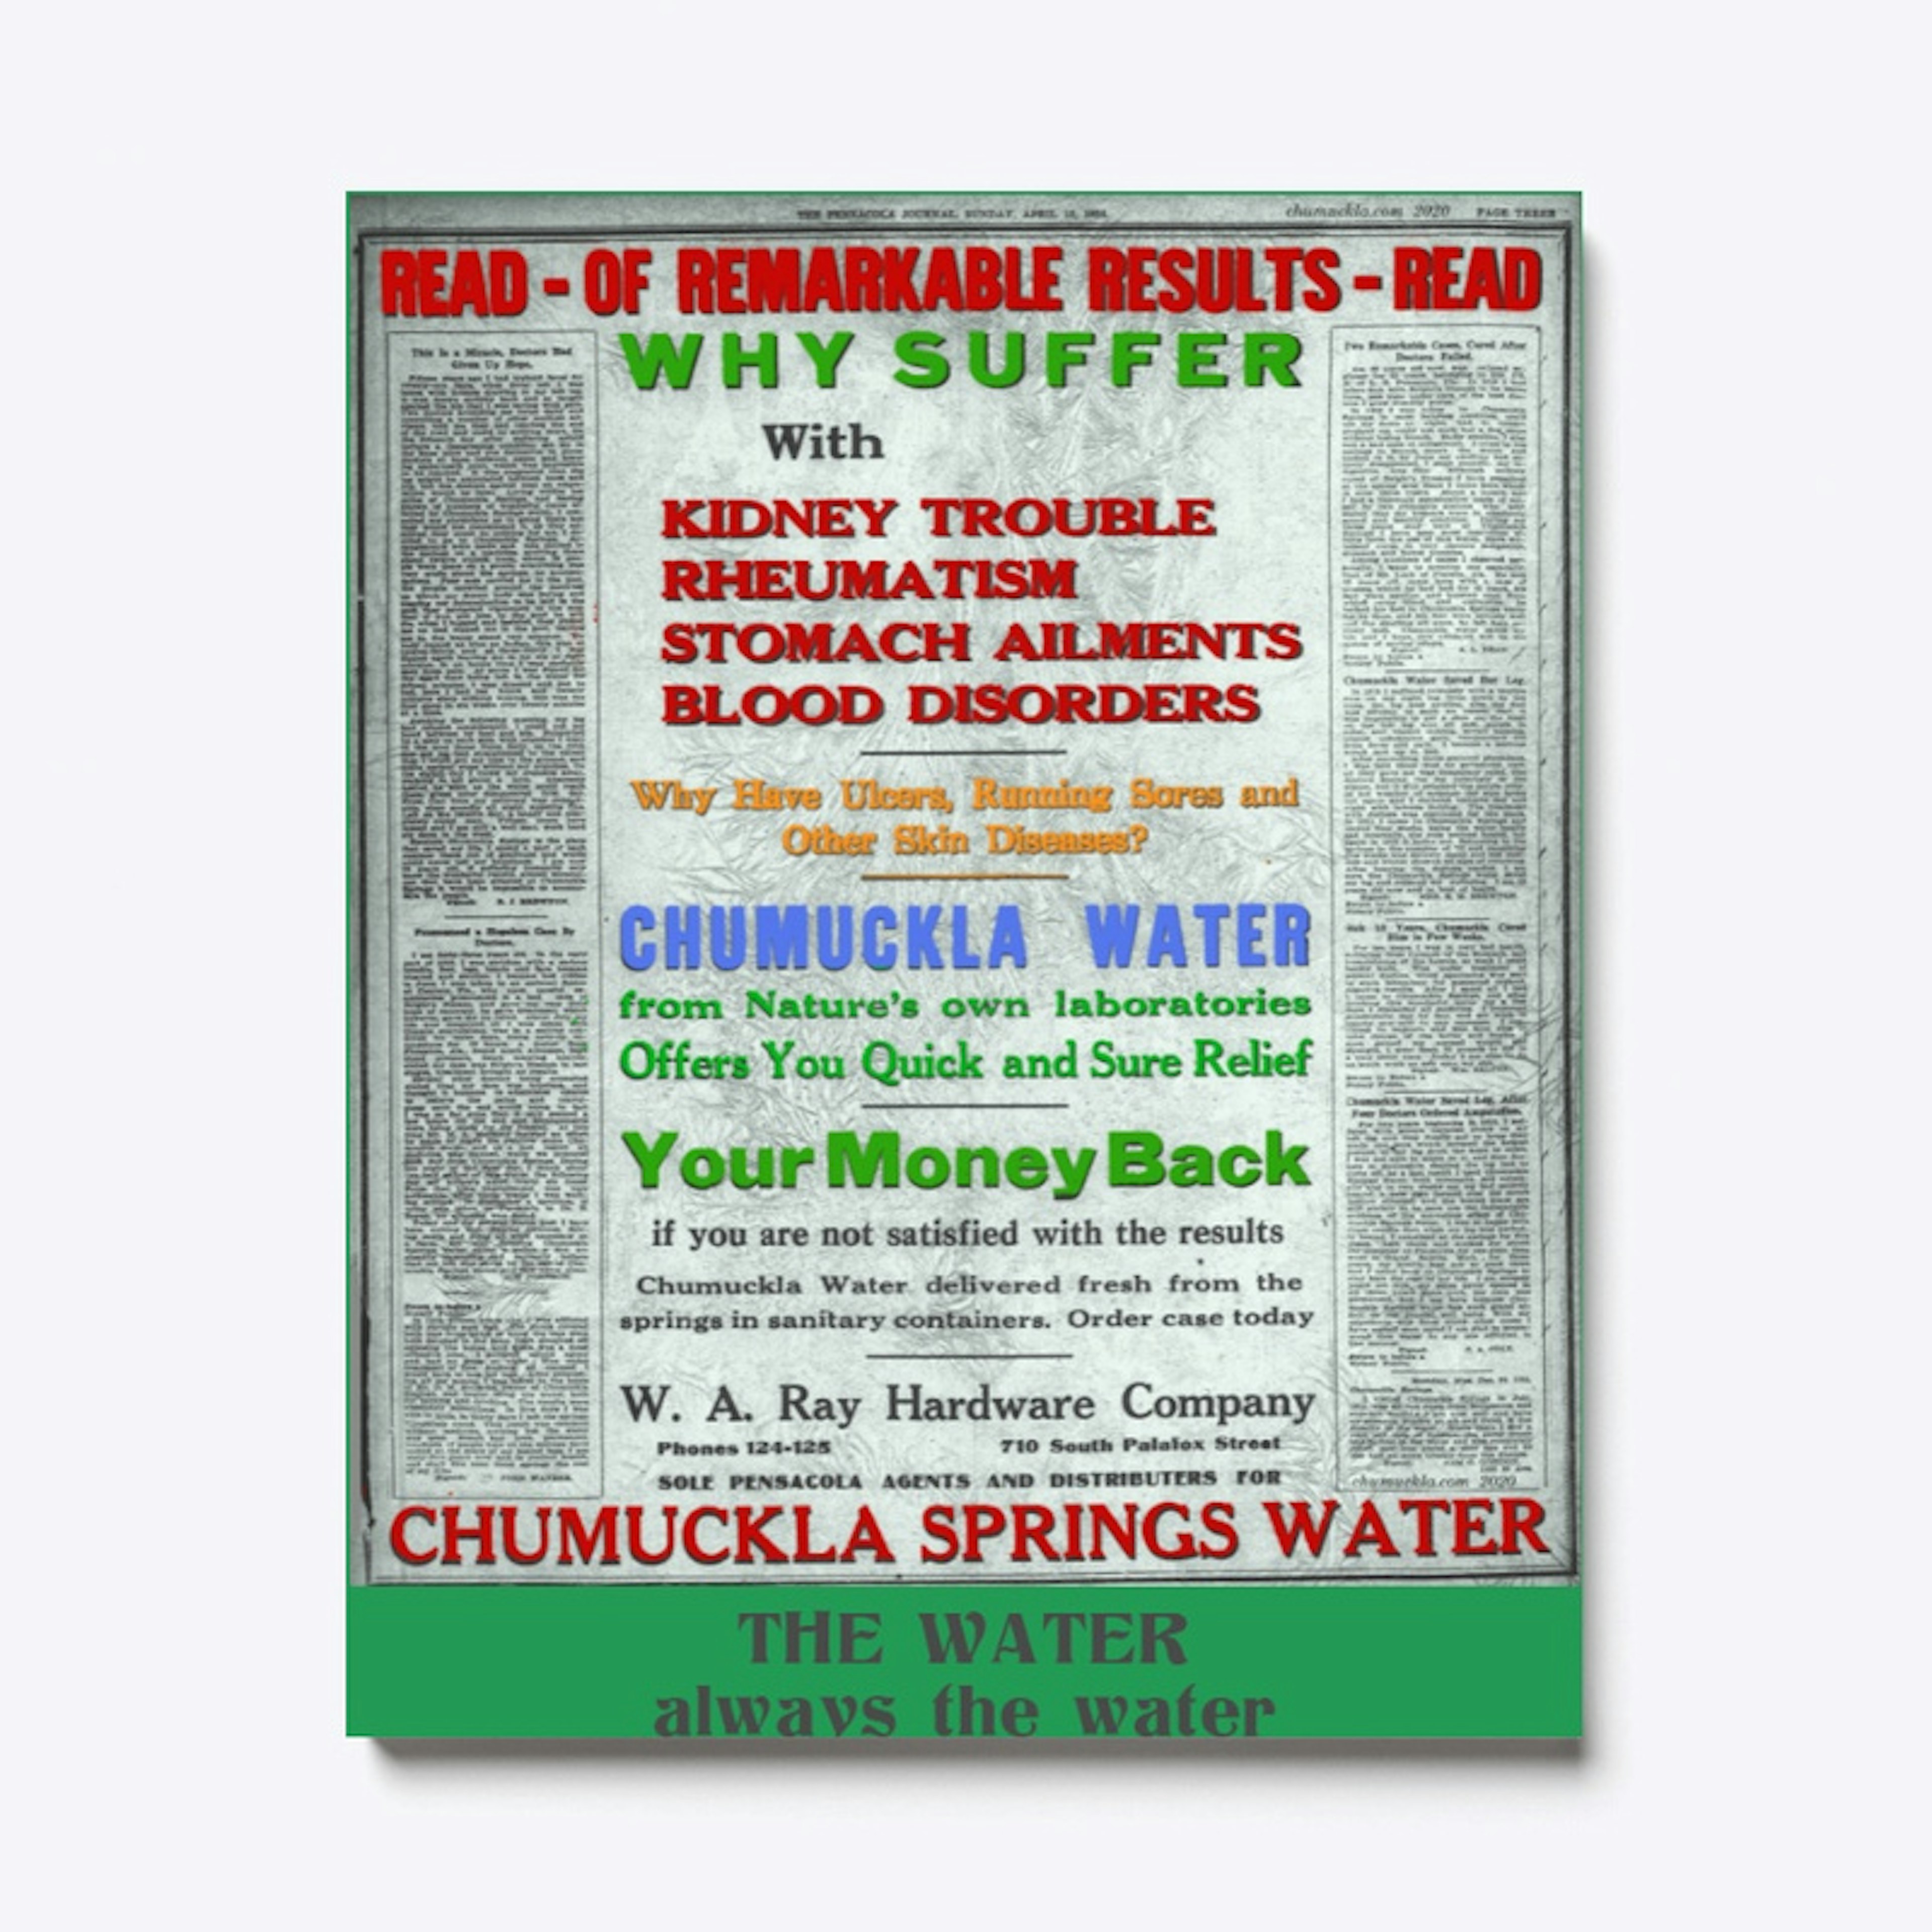 The WHY SUFFER ad of 1924